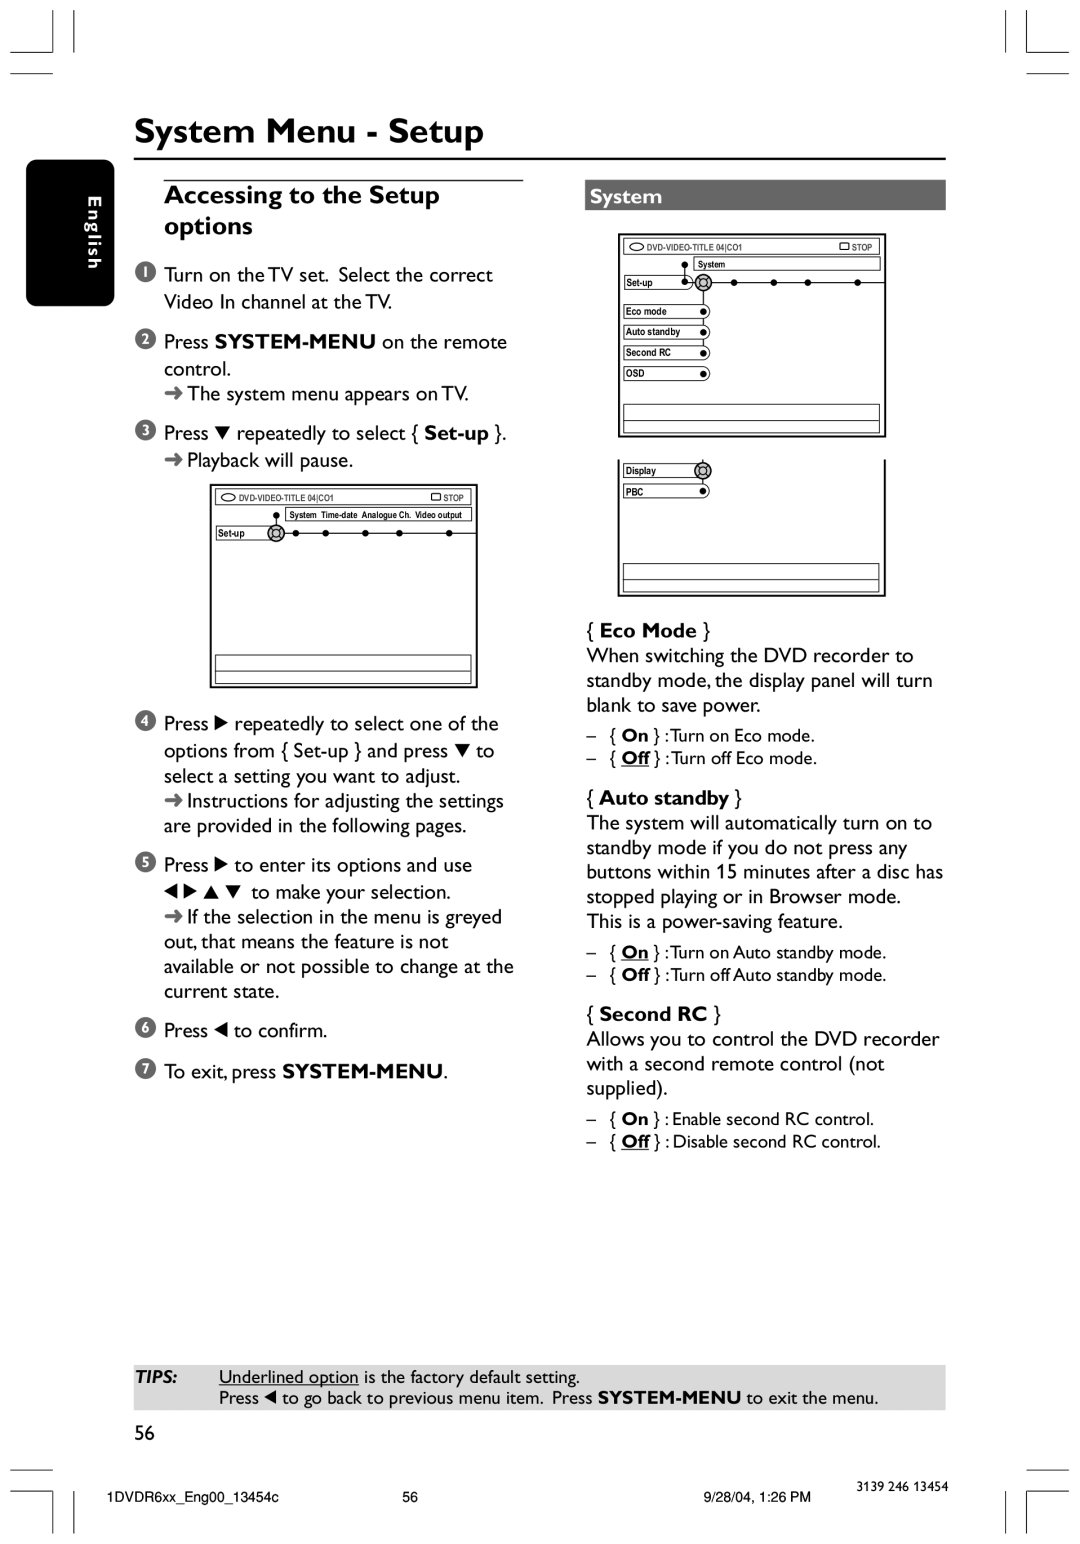 Philips DVDR612/97 user manual System Menu - Setup, Accessing to the Setup options, Eco Mode, Auto standby, Second RC 